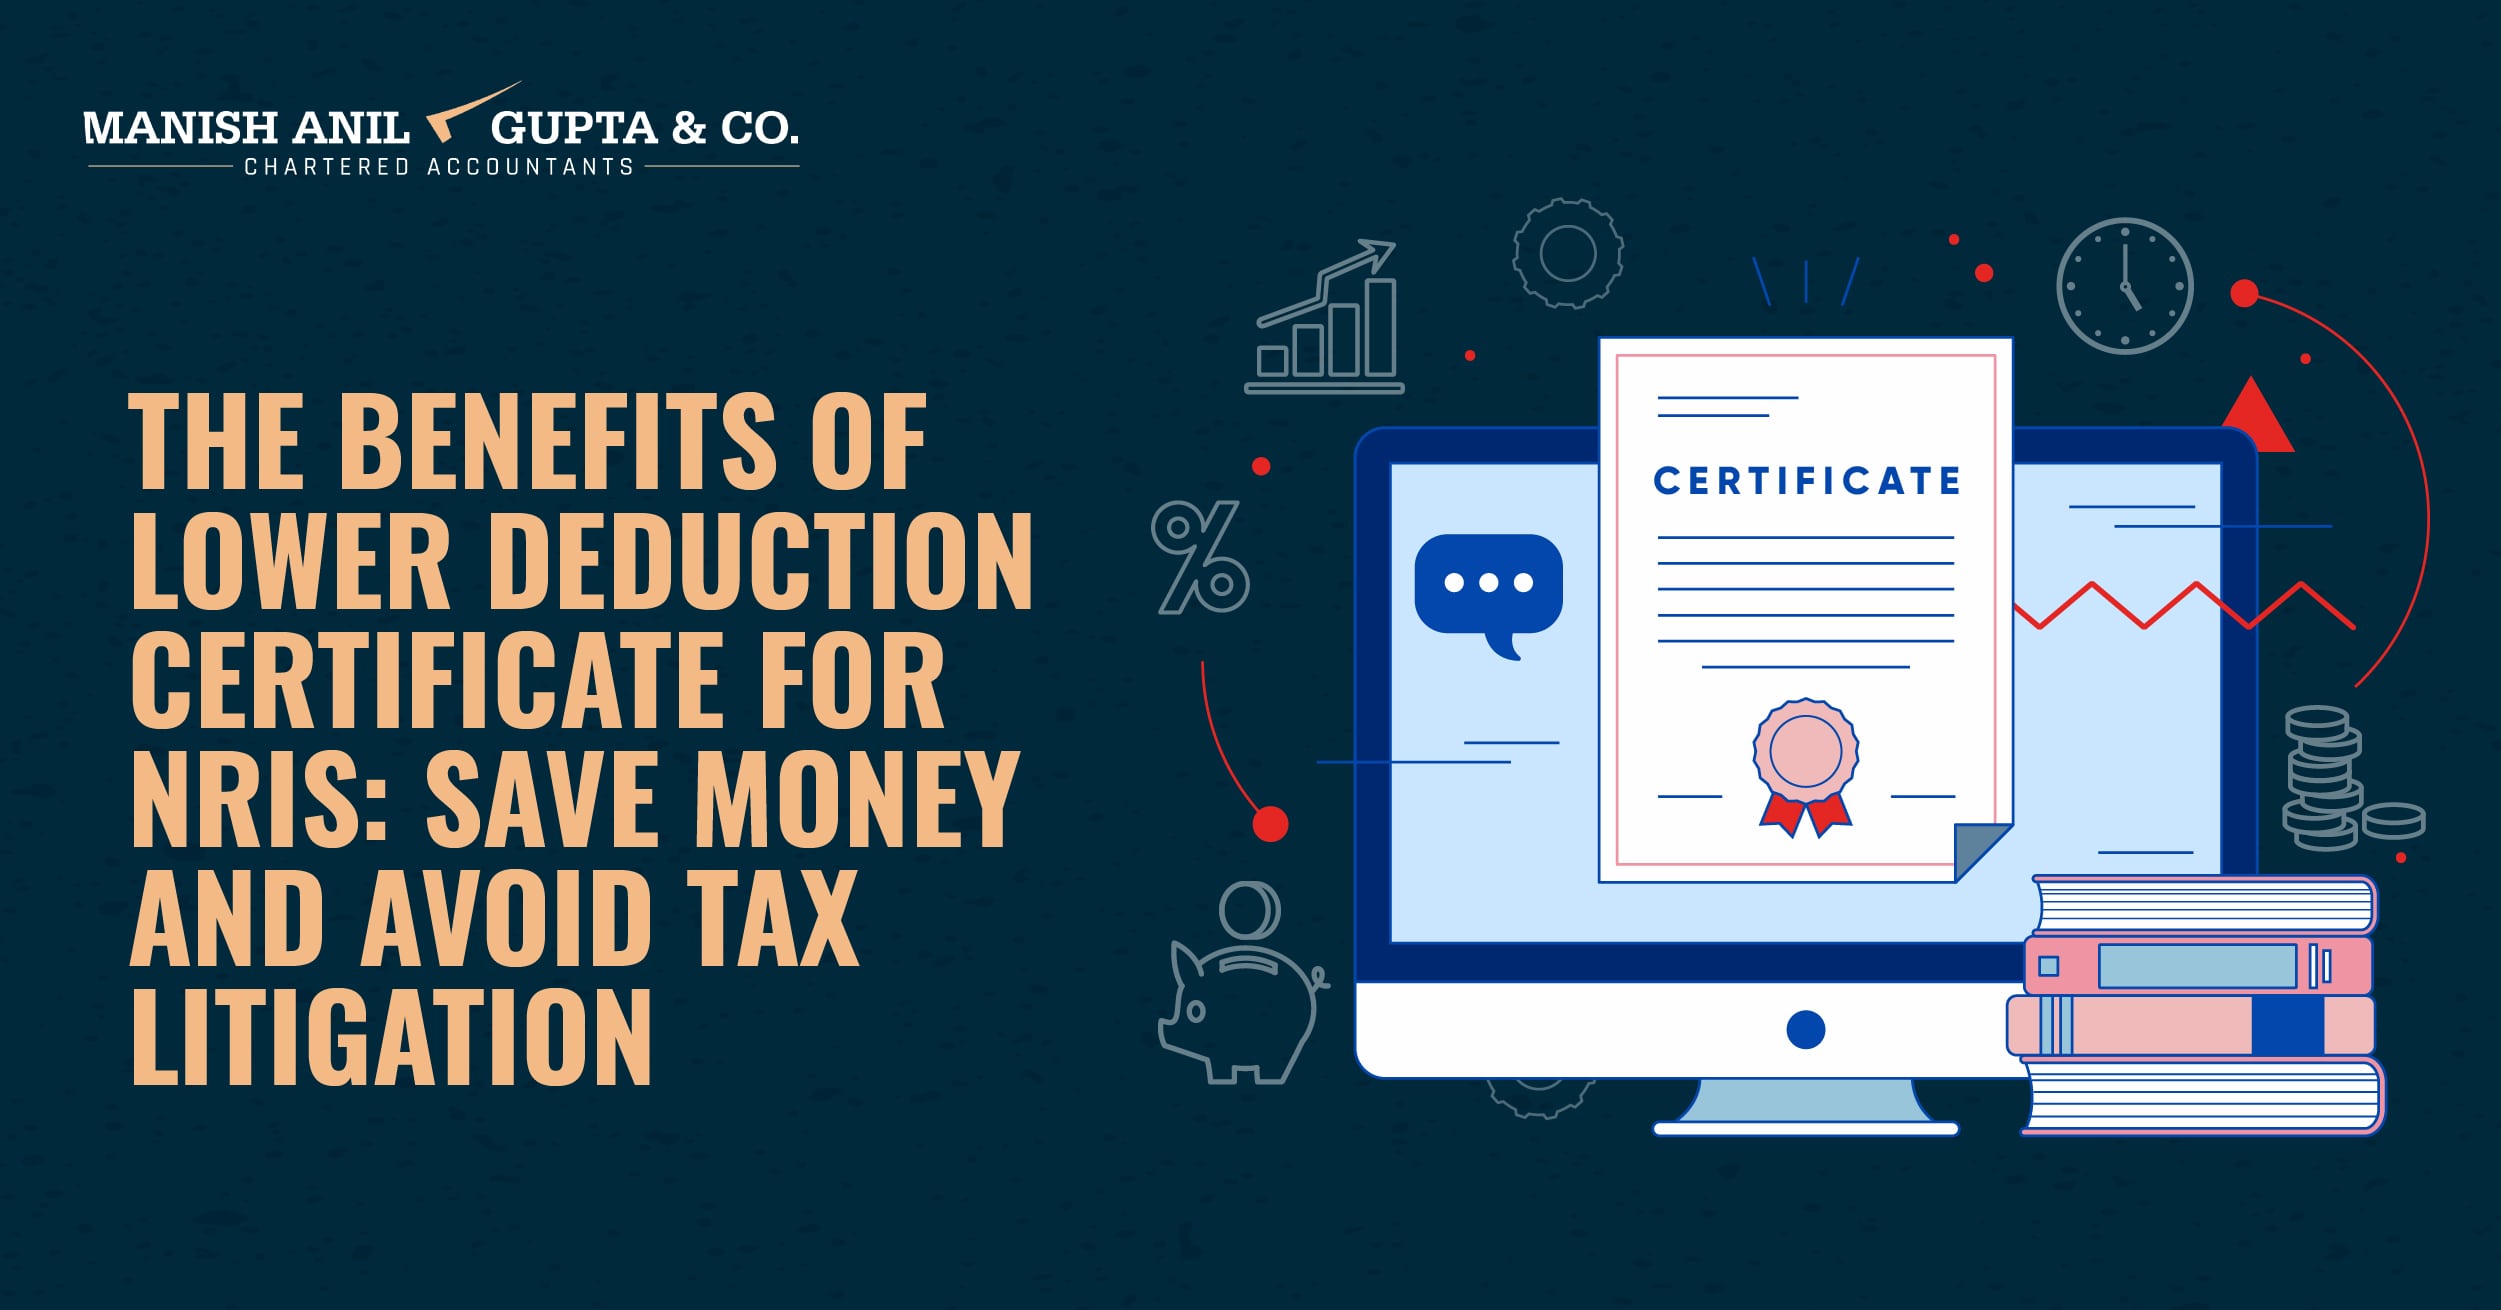 Benefits of Lower Deduction Certificate for NRIs: Save Money and Avoid Tax Litigation